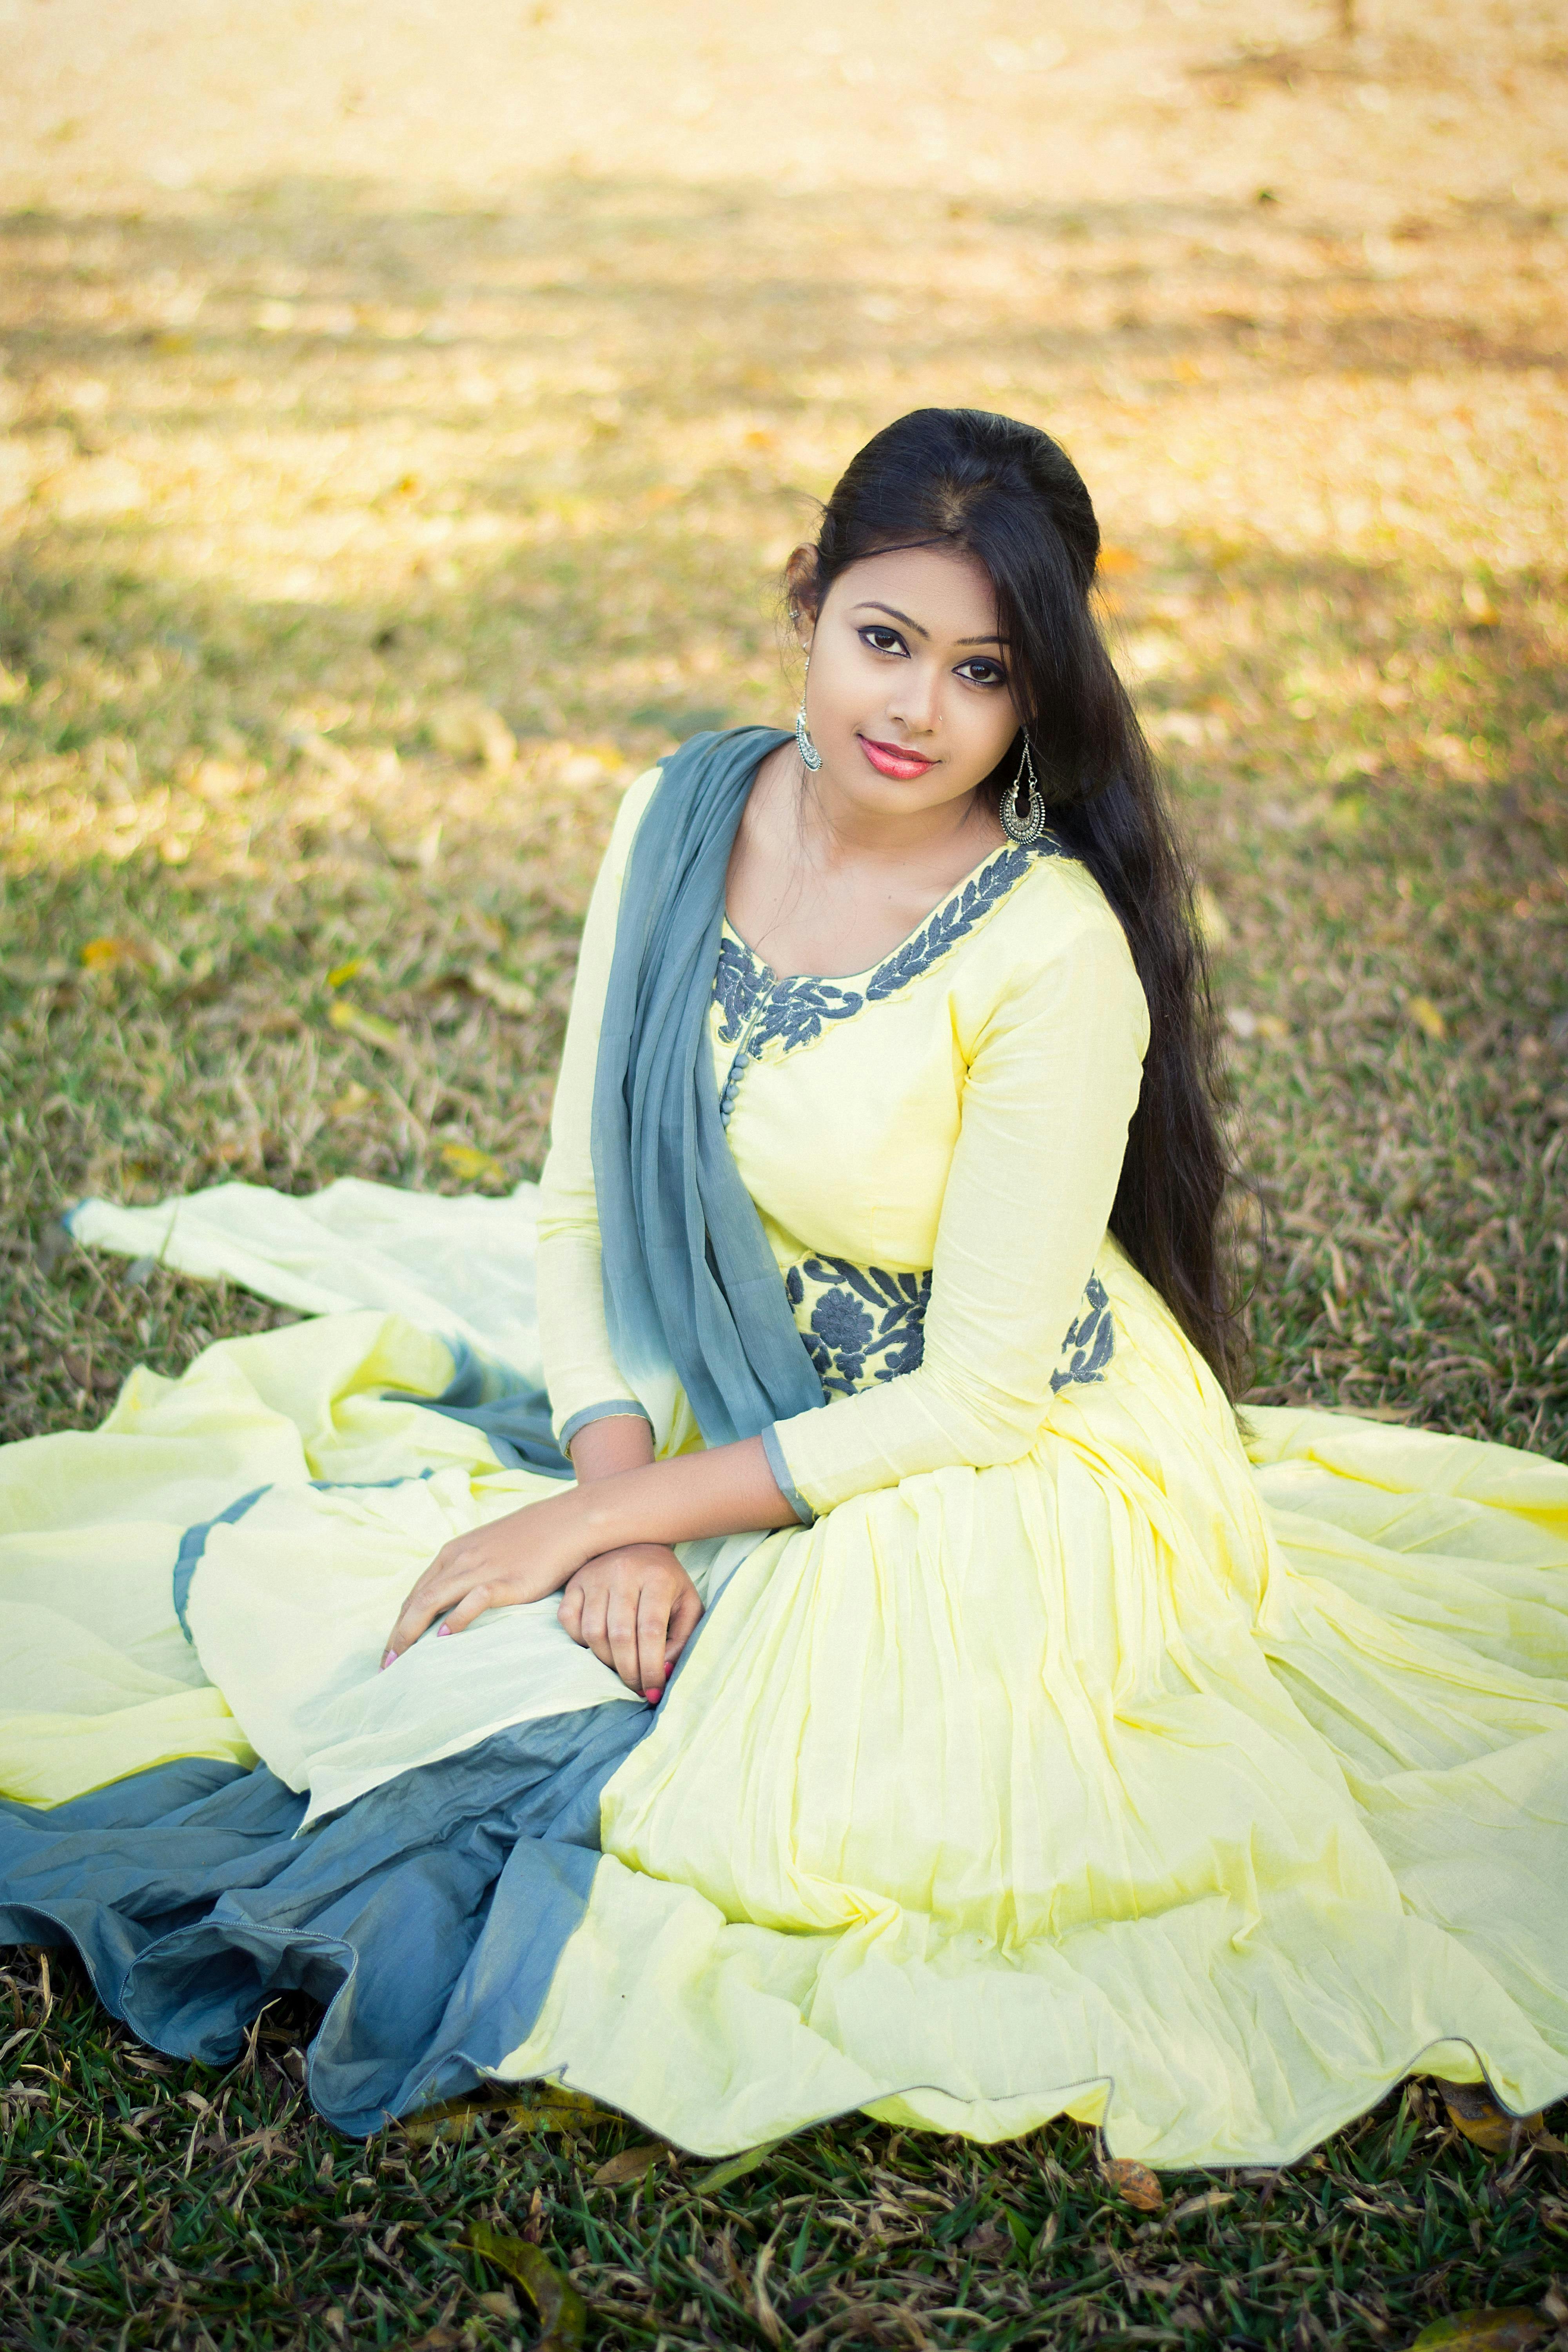 Suza poses in a traditional dress during a photoshoot